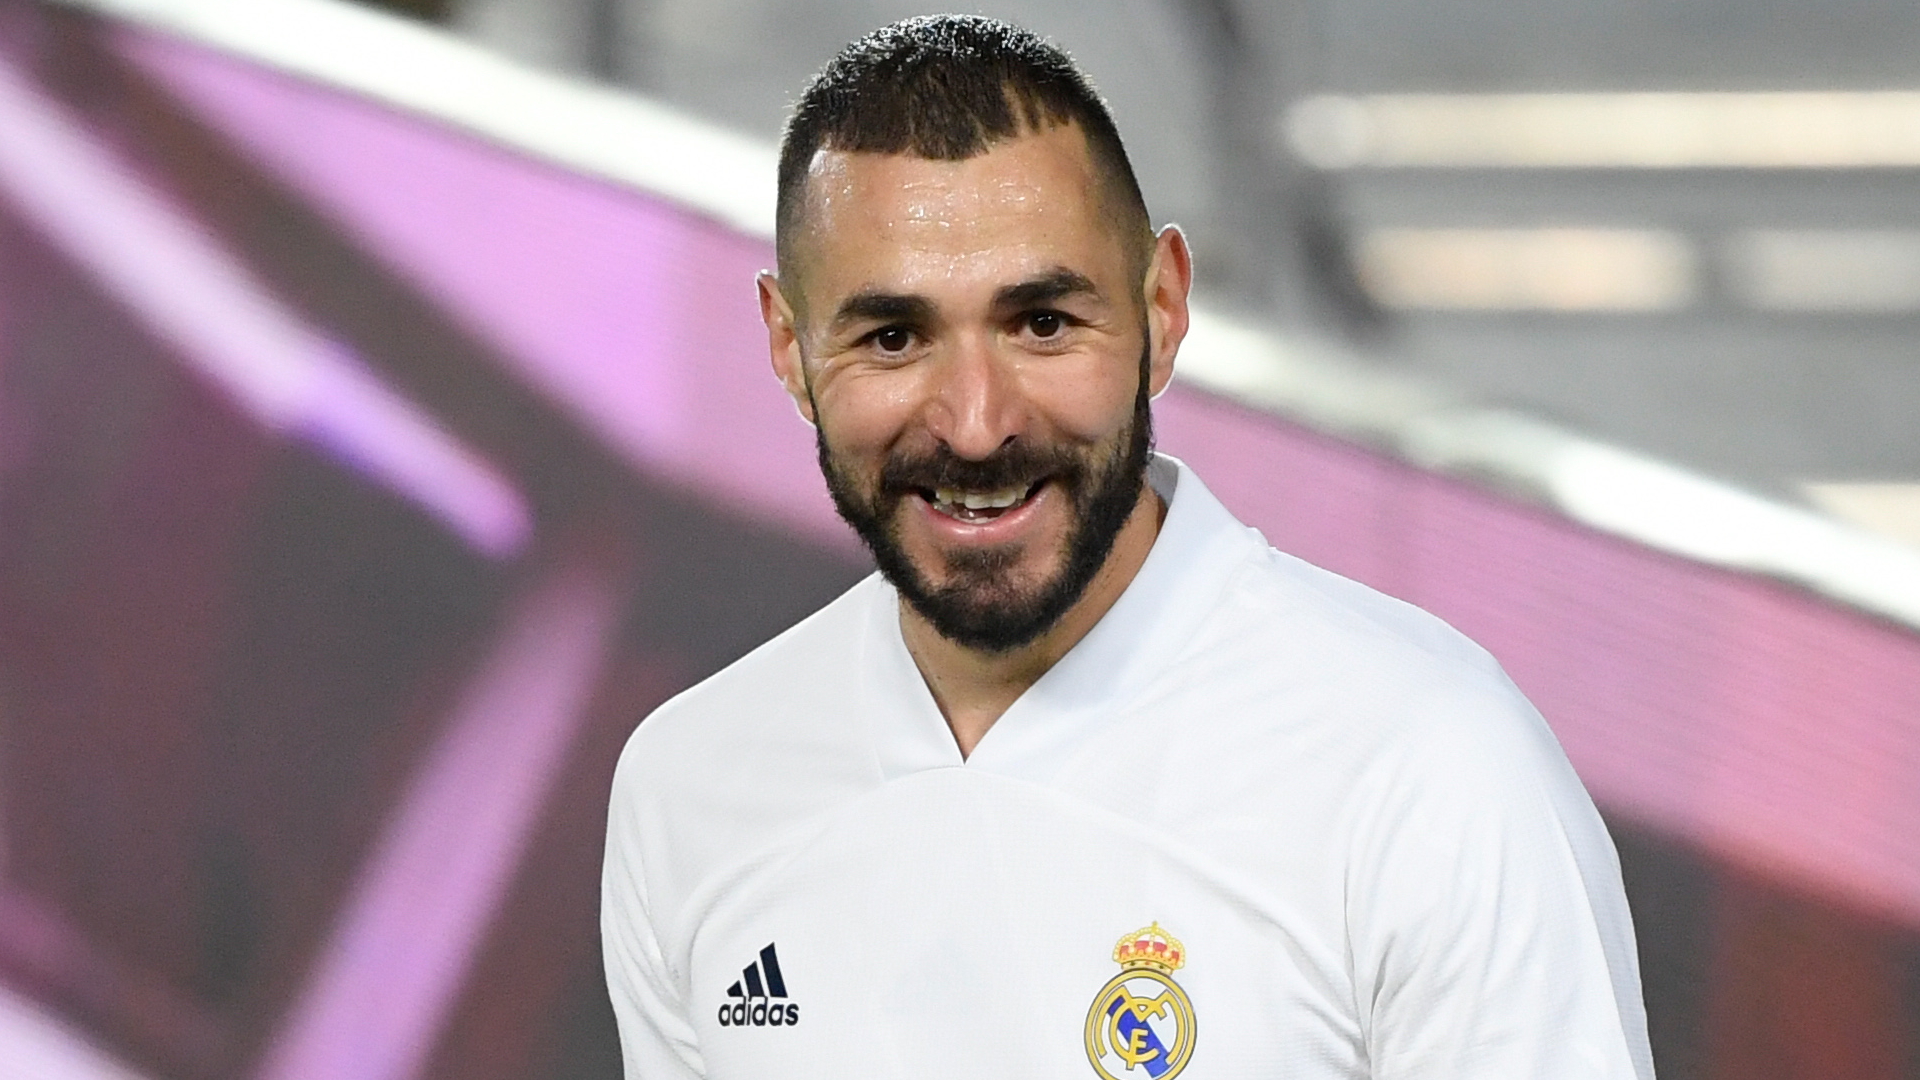 FFF presidential candidate vows to bring Benzema back into France fold